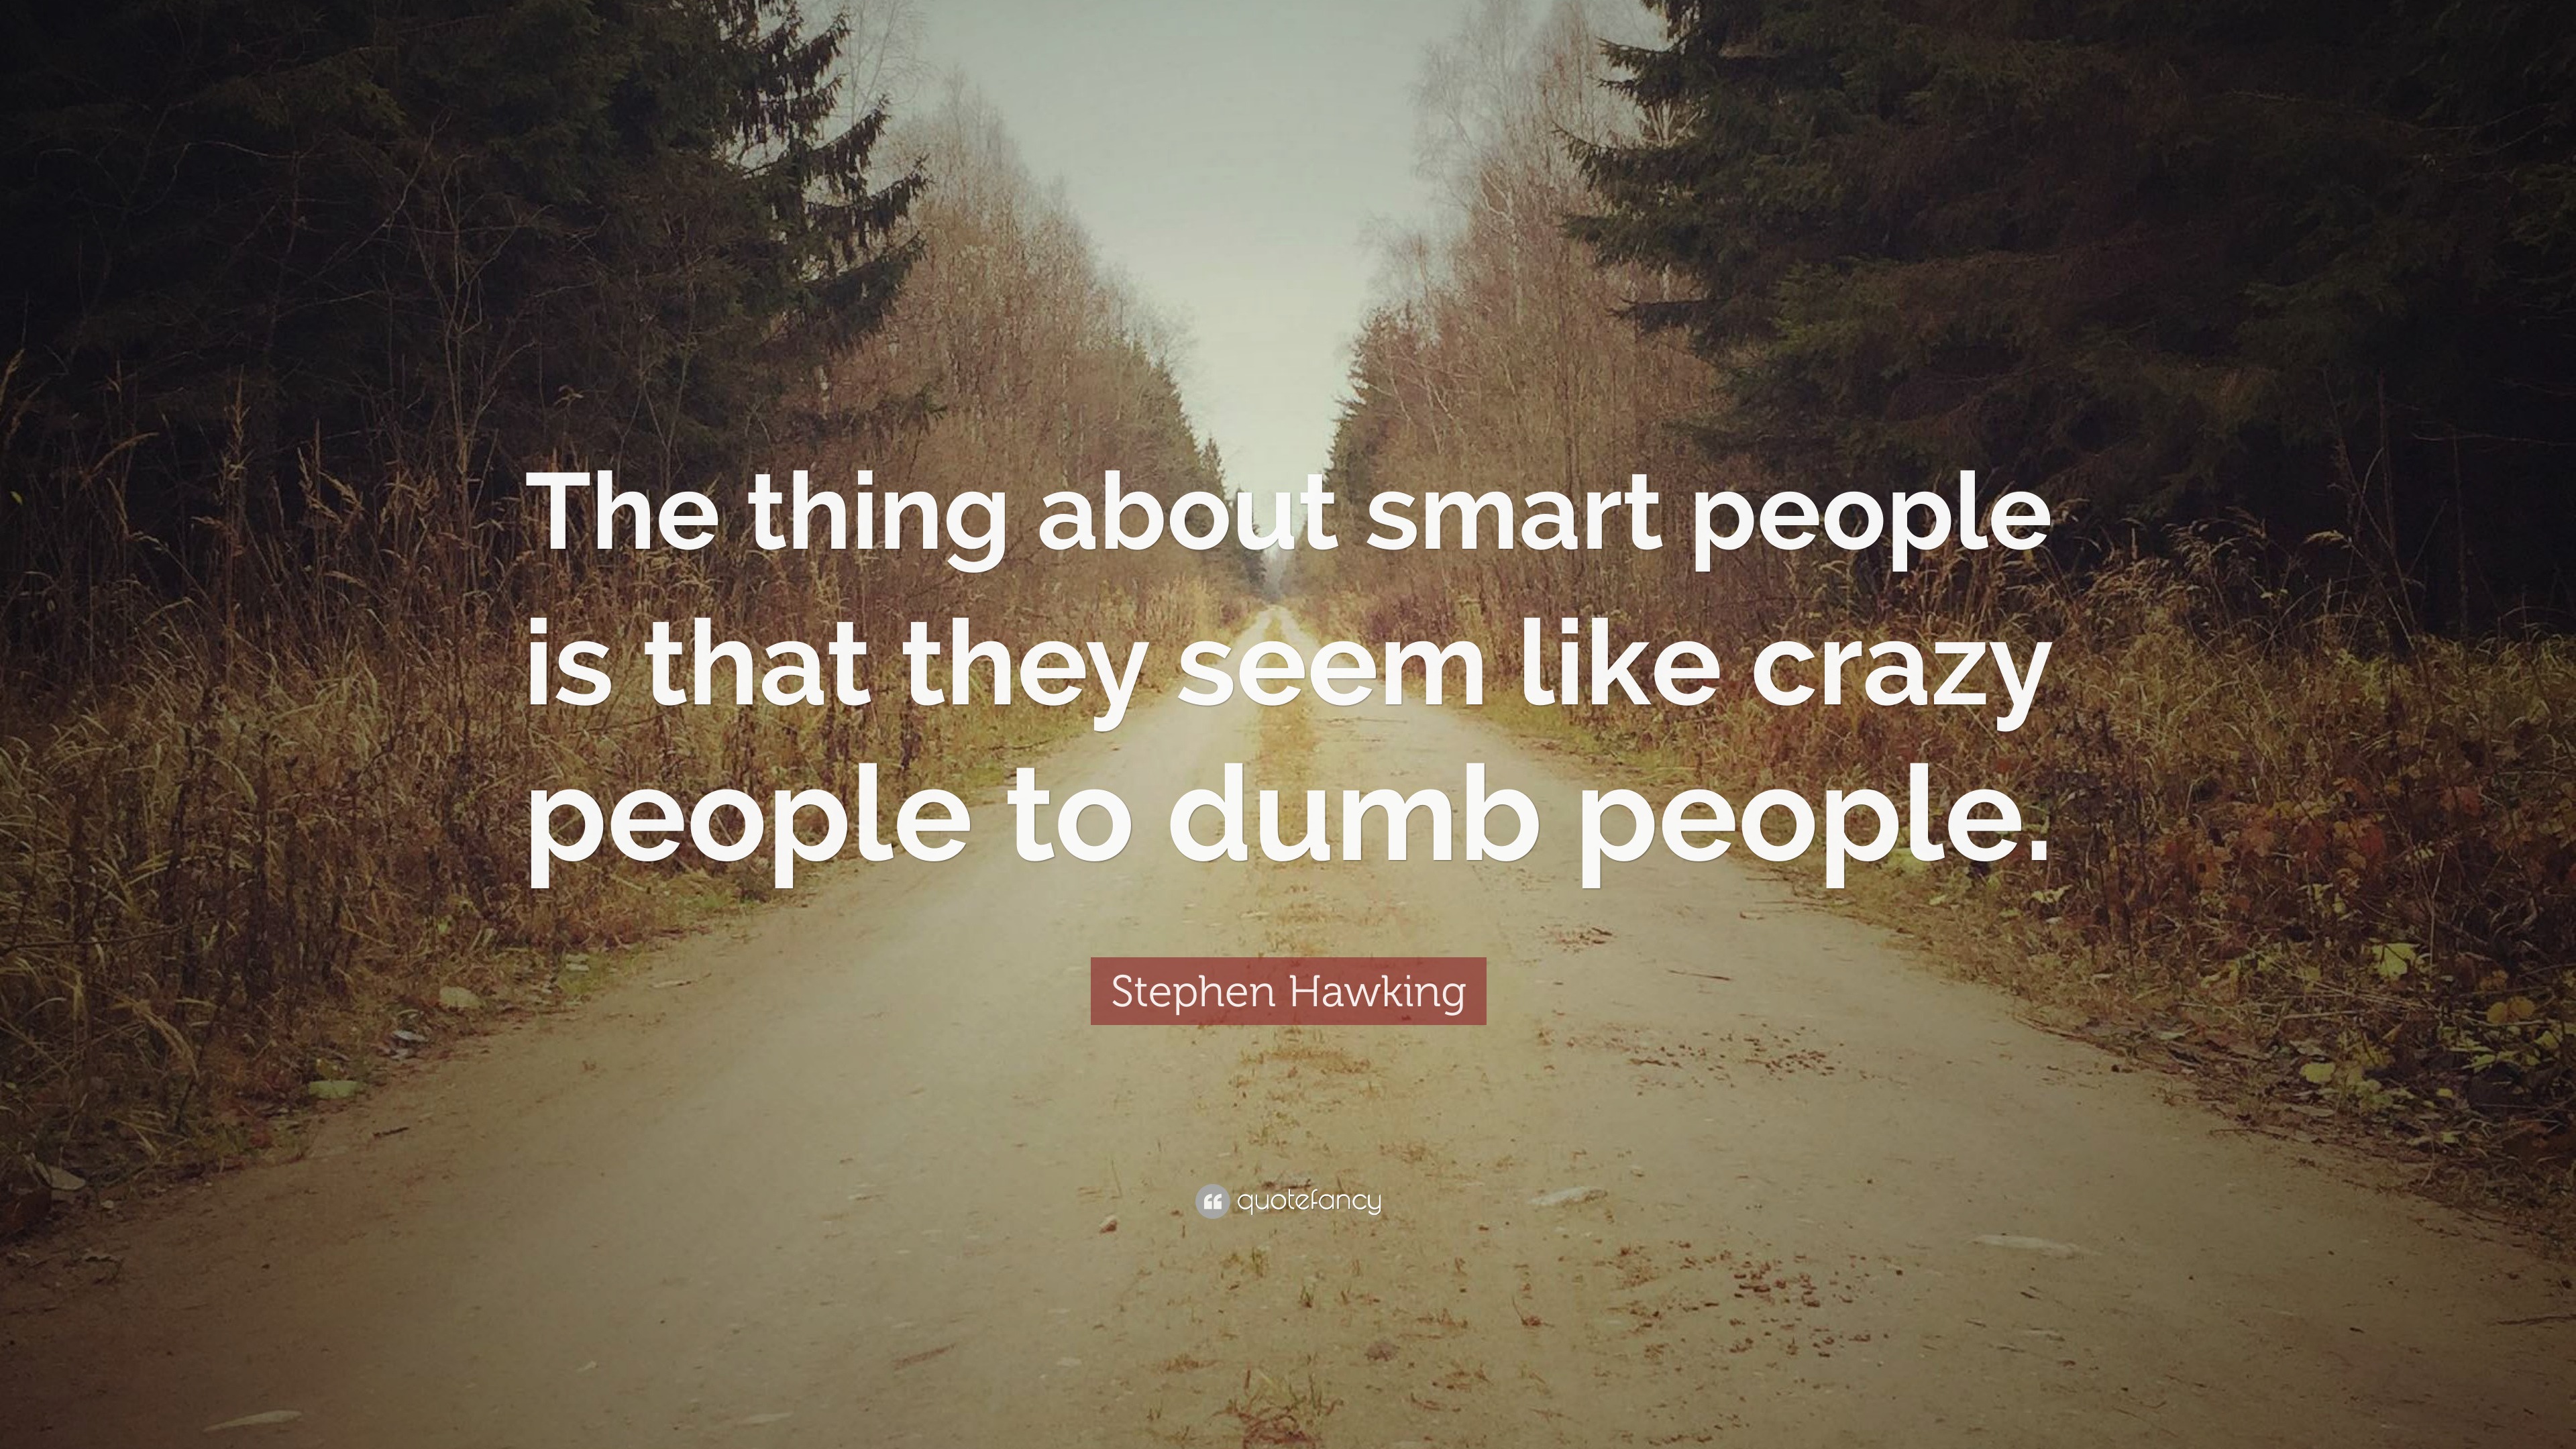 Stephen Hawking Quote “The thing about smart people is